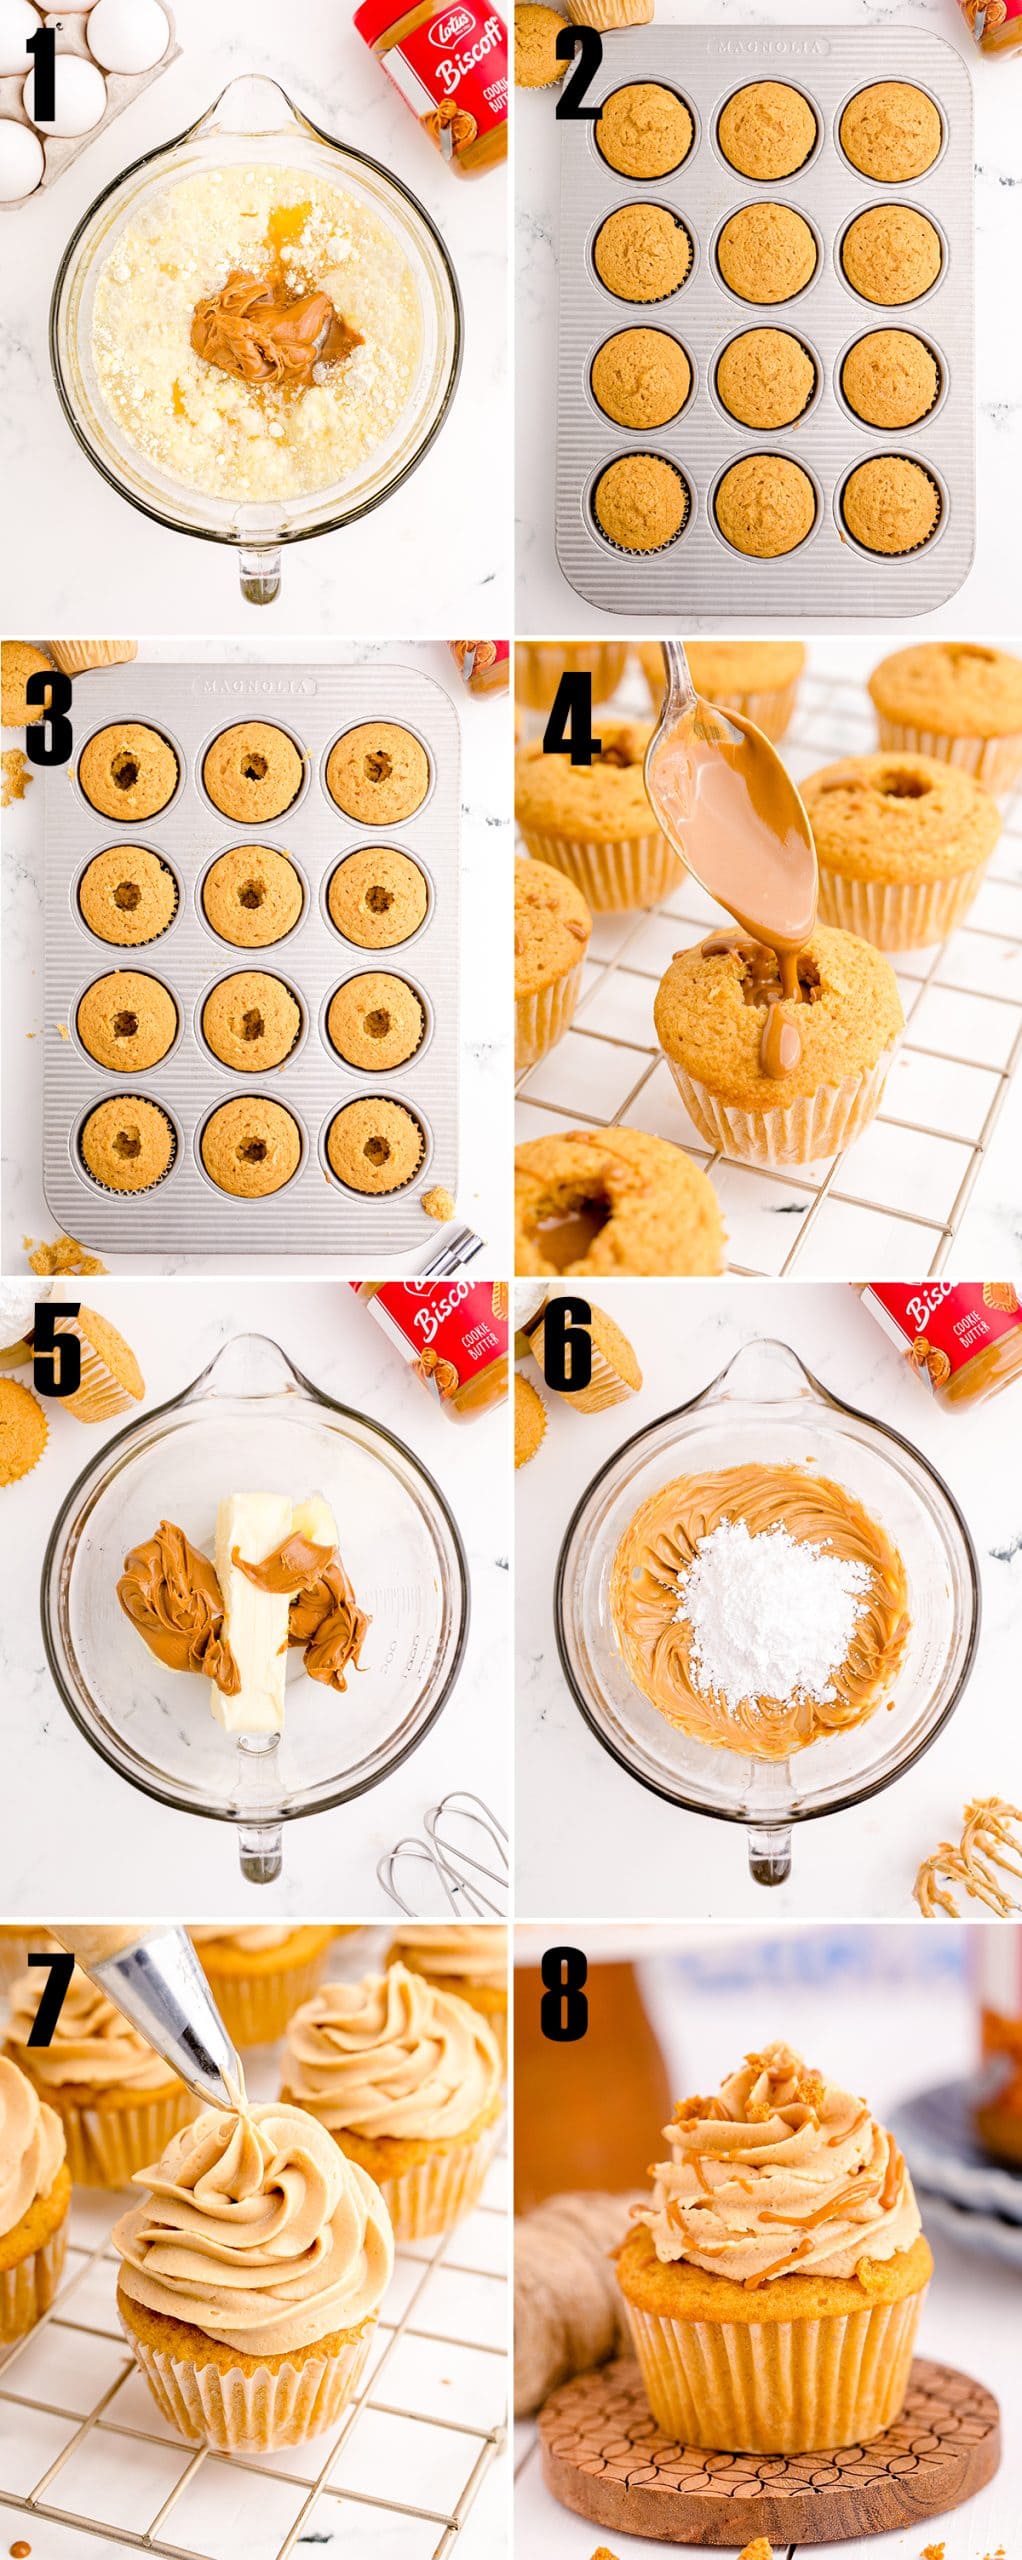 A collage of 8 photos showing how to make Biscoff Cupcakes.